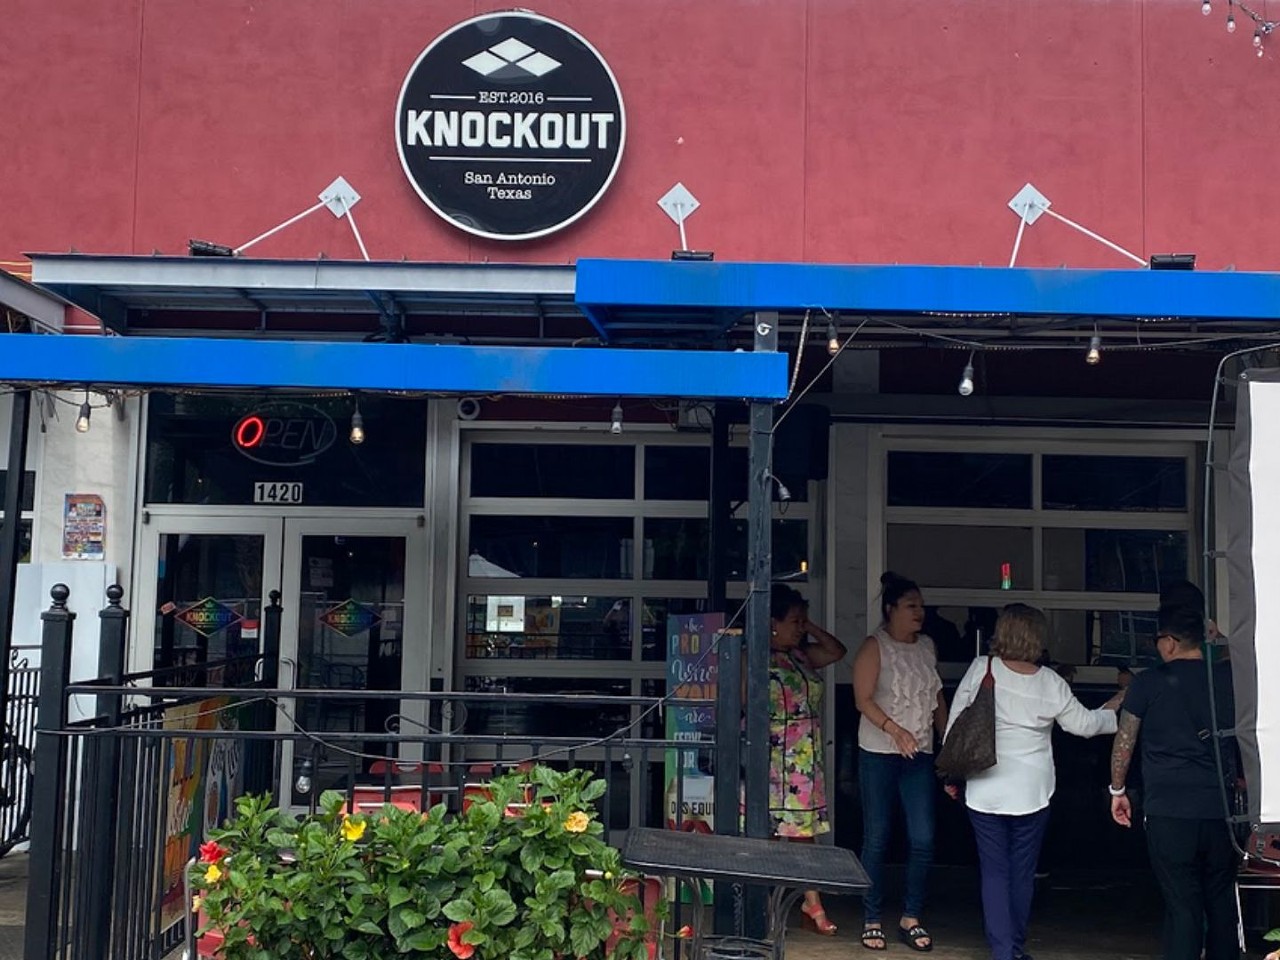 Knockout
1420 N Main Ave., (210) 227-7678, knockoutsa.com
With a wide selection of pizza and all-day drink specials, Knockout has established itself as among the youngest LGBTQ+ bars in the city. Spurs fans looking for a new game night spot may find that Knockout is just the place — the bar has 15 flat screen TVs dedicated to sports.